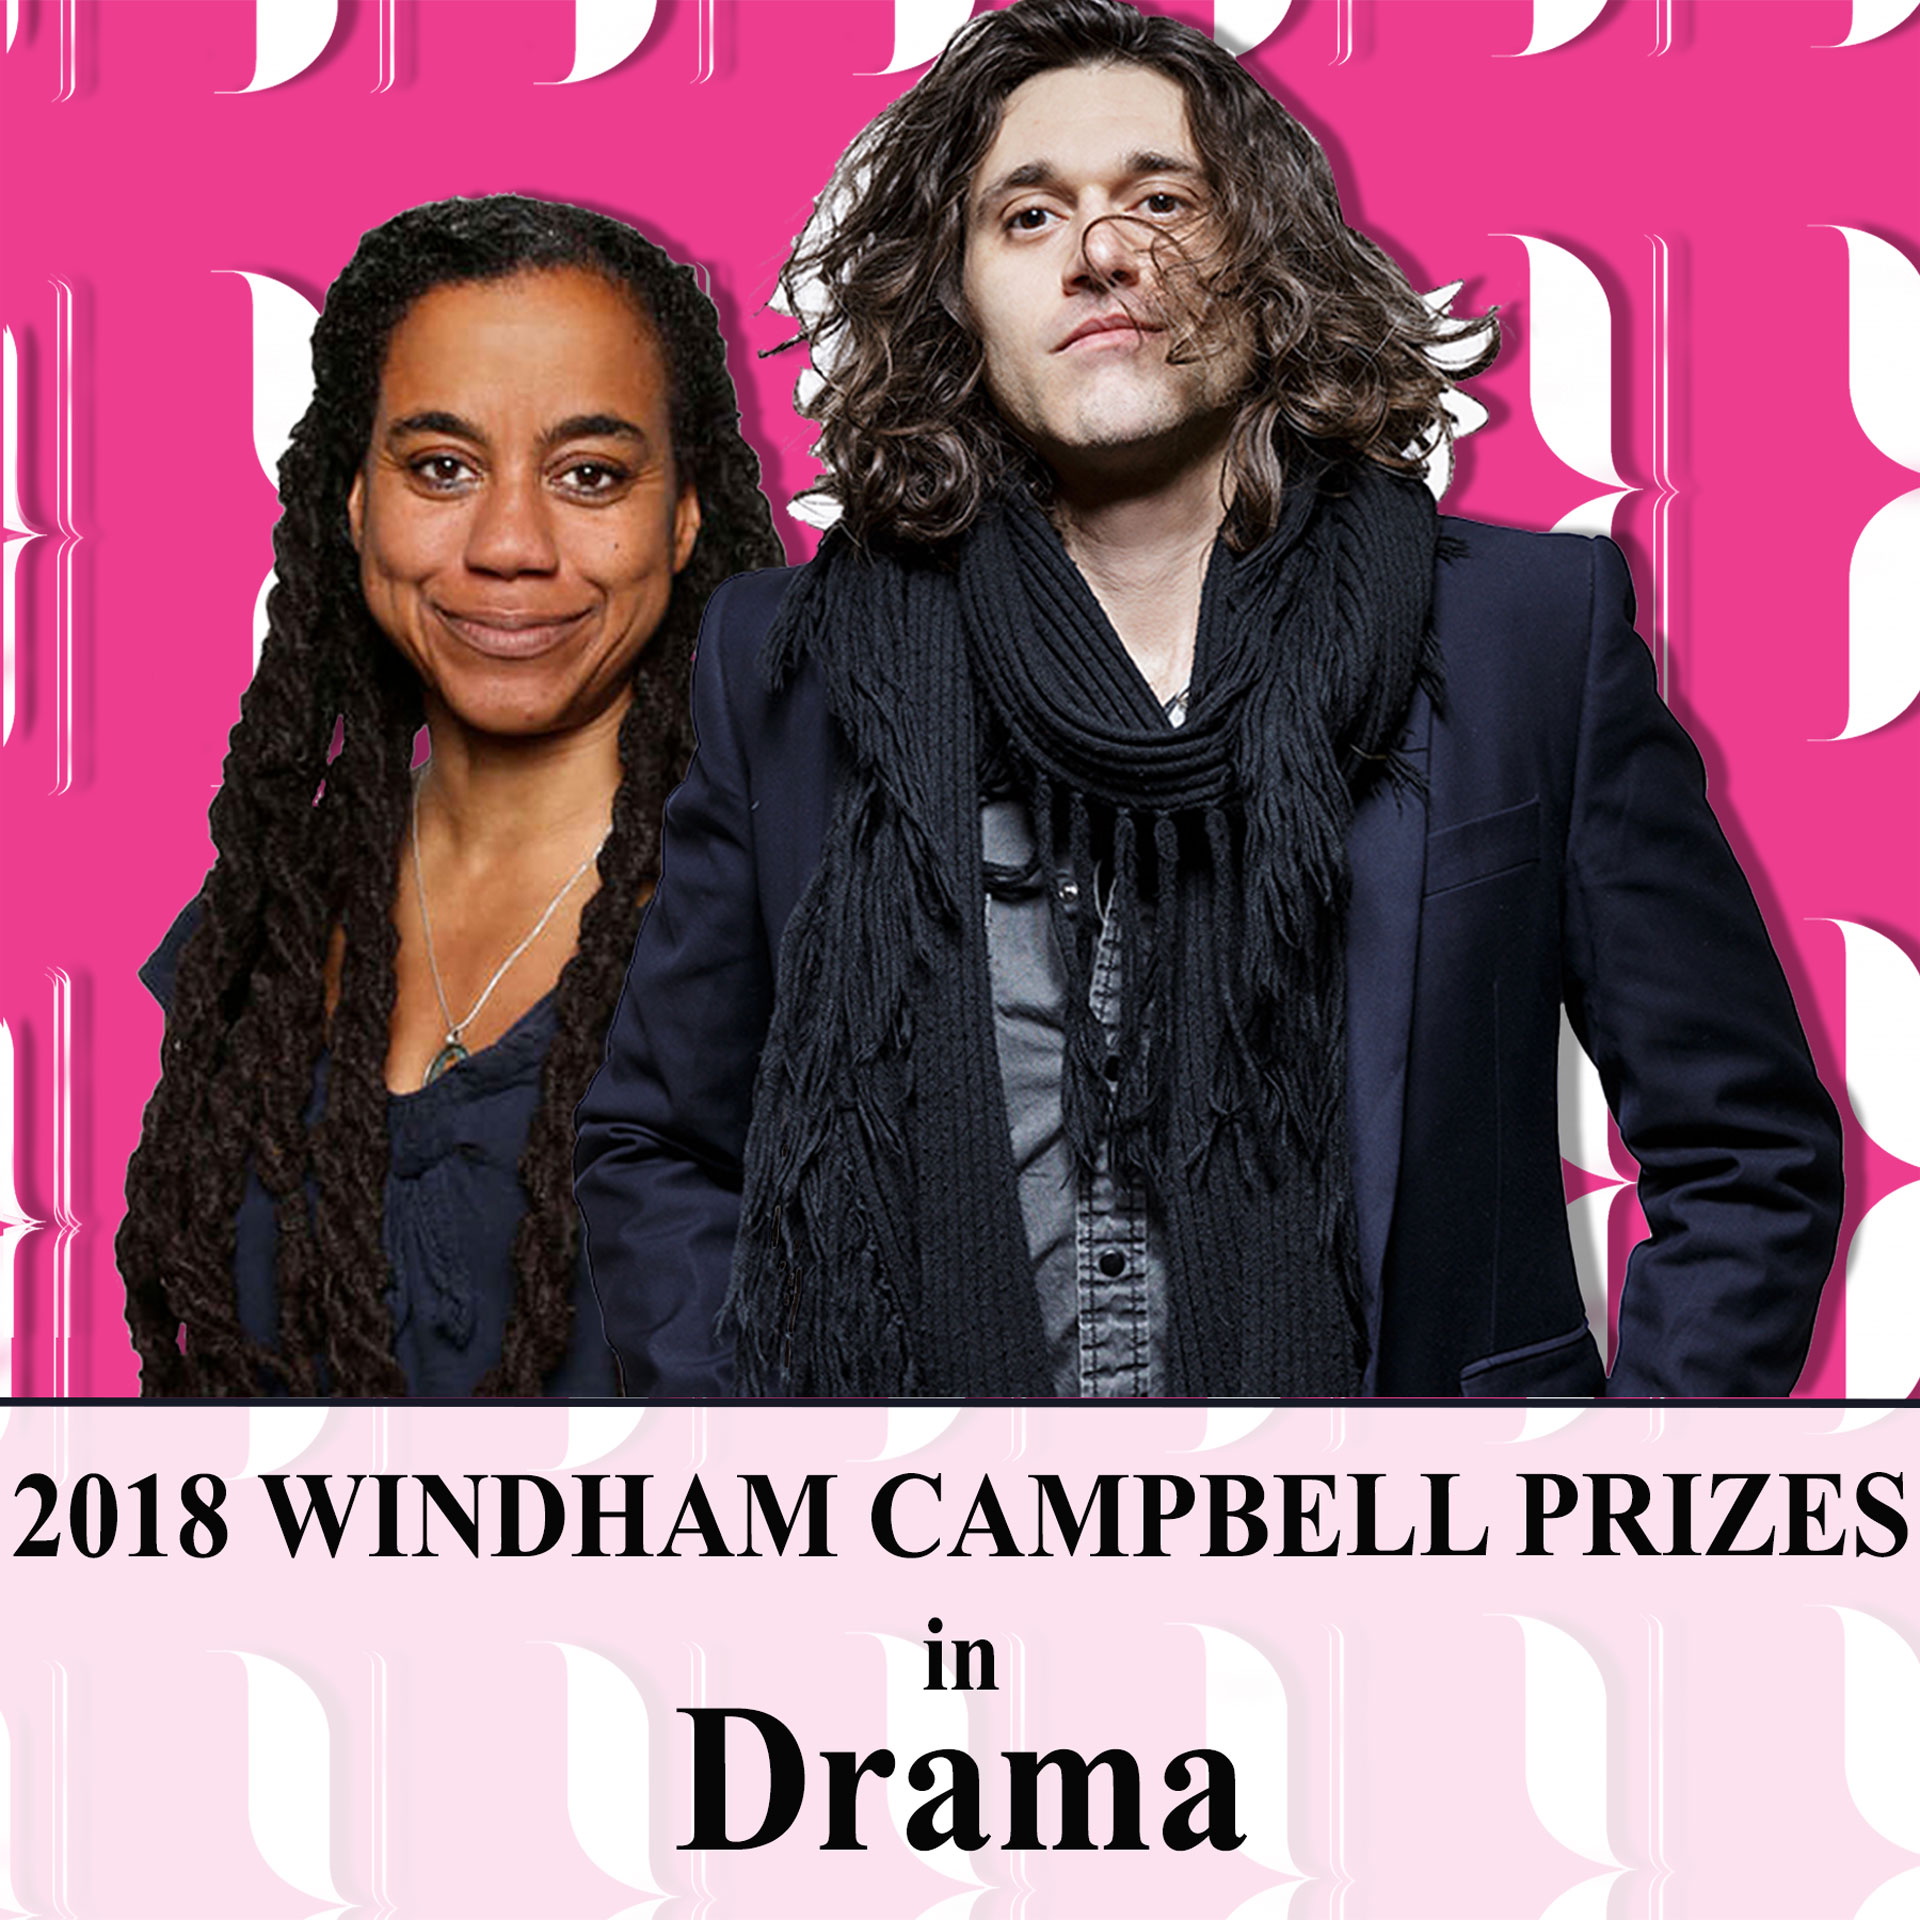 2018 Windham Campbell Prize Recipients Suzan-Lori Parks and Lucas Hnath